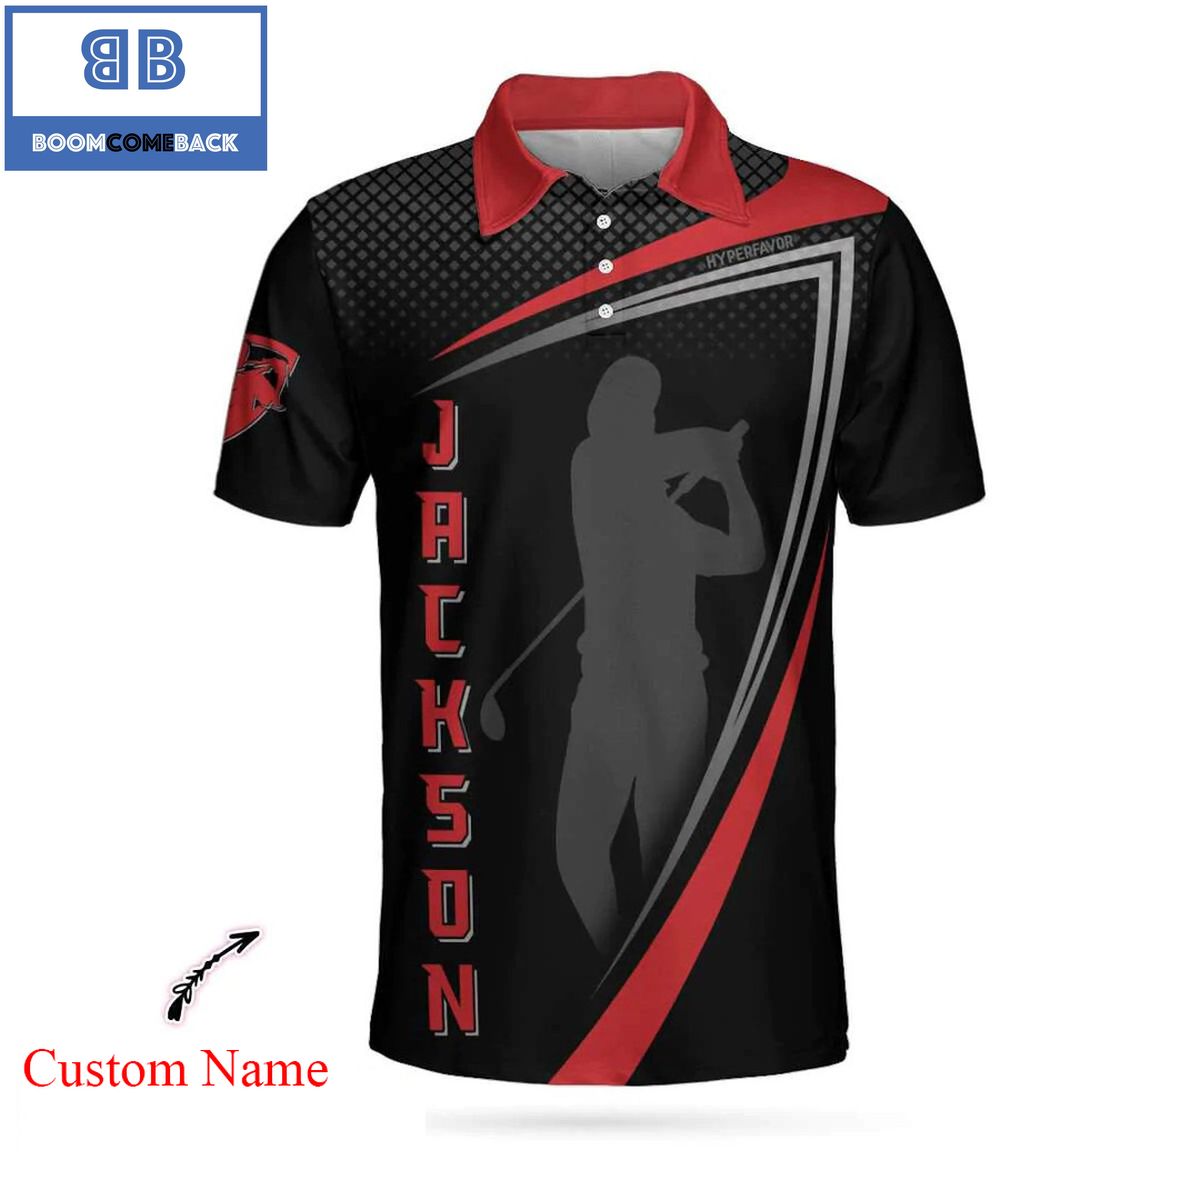 Personalized2BSport2BGolf2BWith2BGolfer2BSilhouette2BAthletic2BCollared2BMens2BPolo2BShirt2B1 TboUE